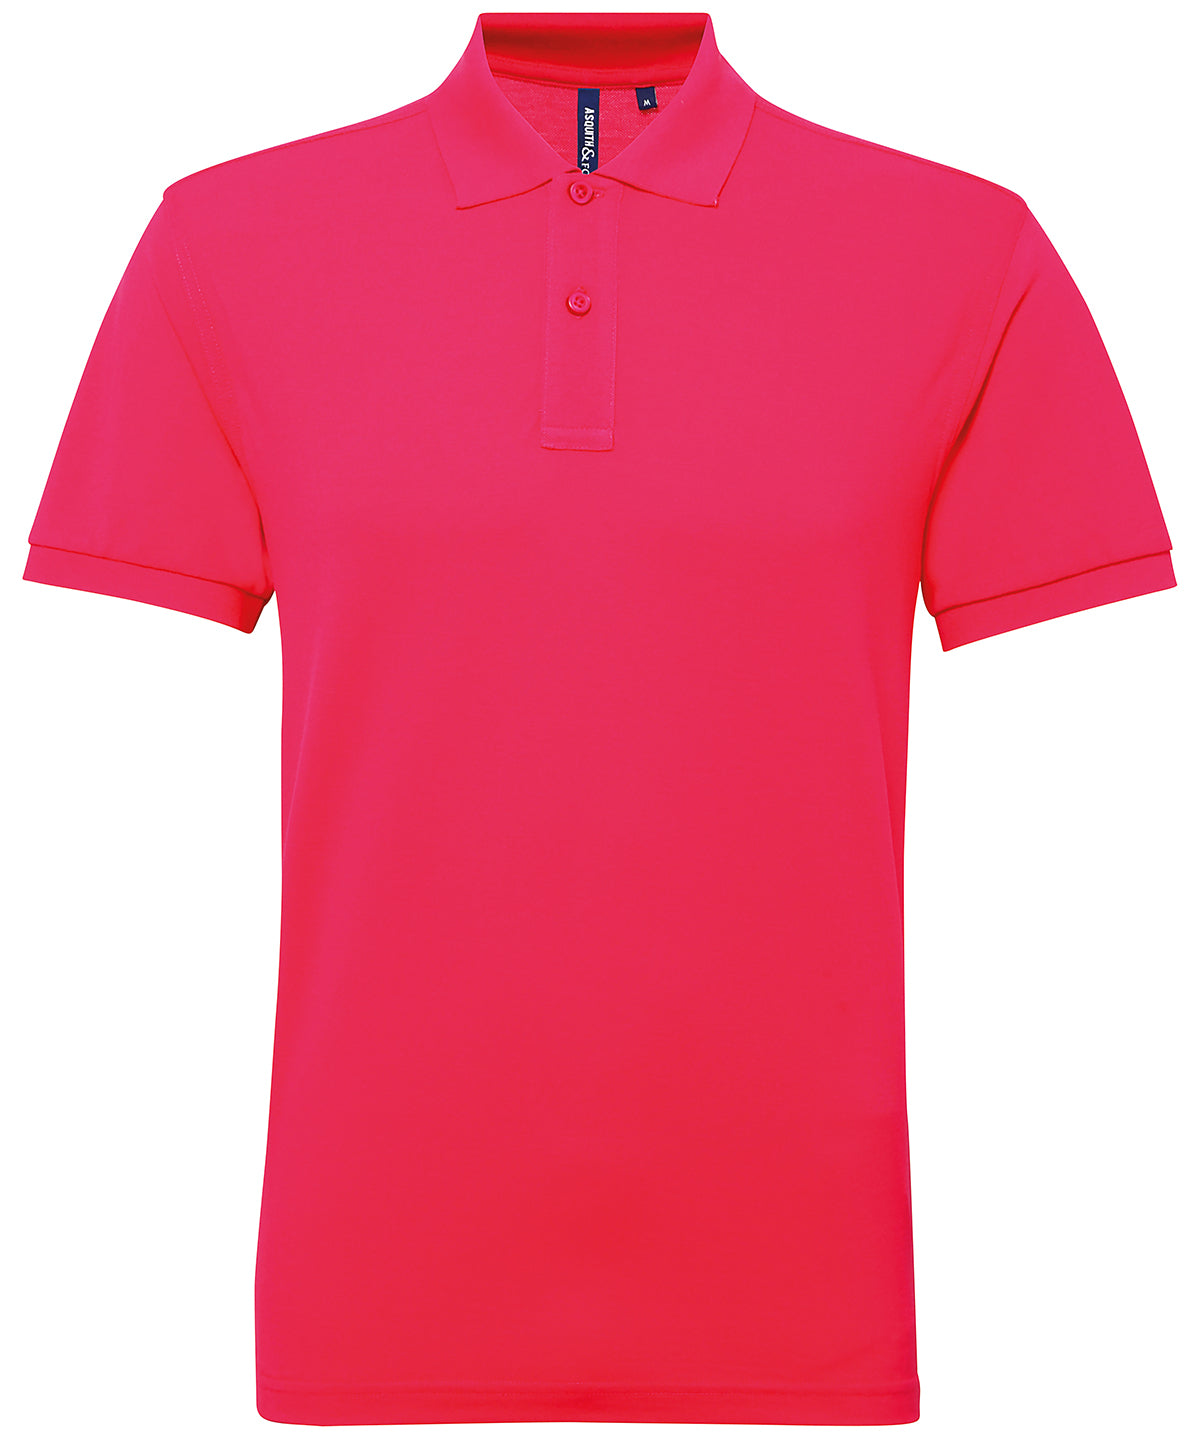 Personalised Polo Shirts - Mid Red Asquith & Fox Men’s polycotton blend polo